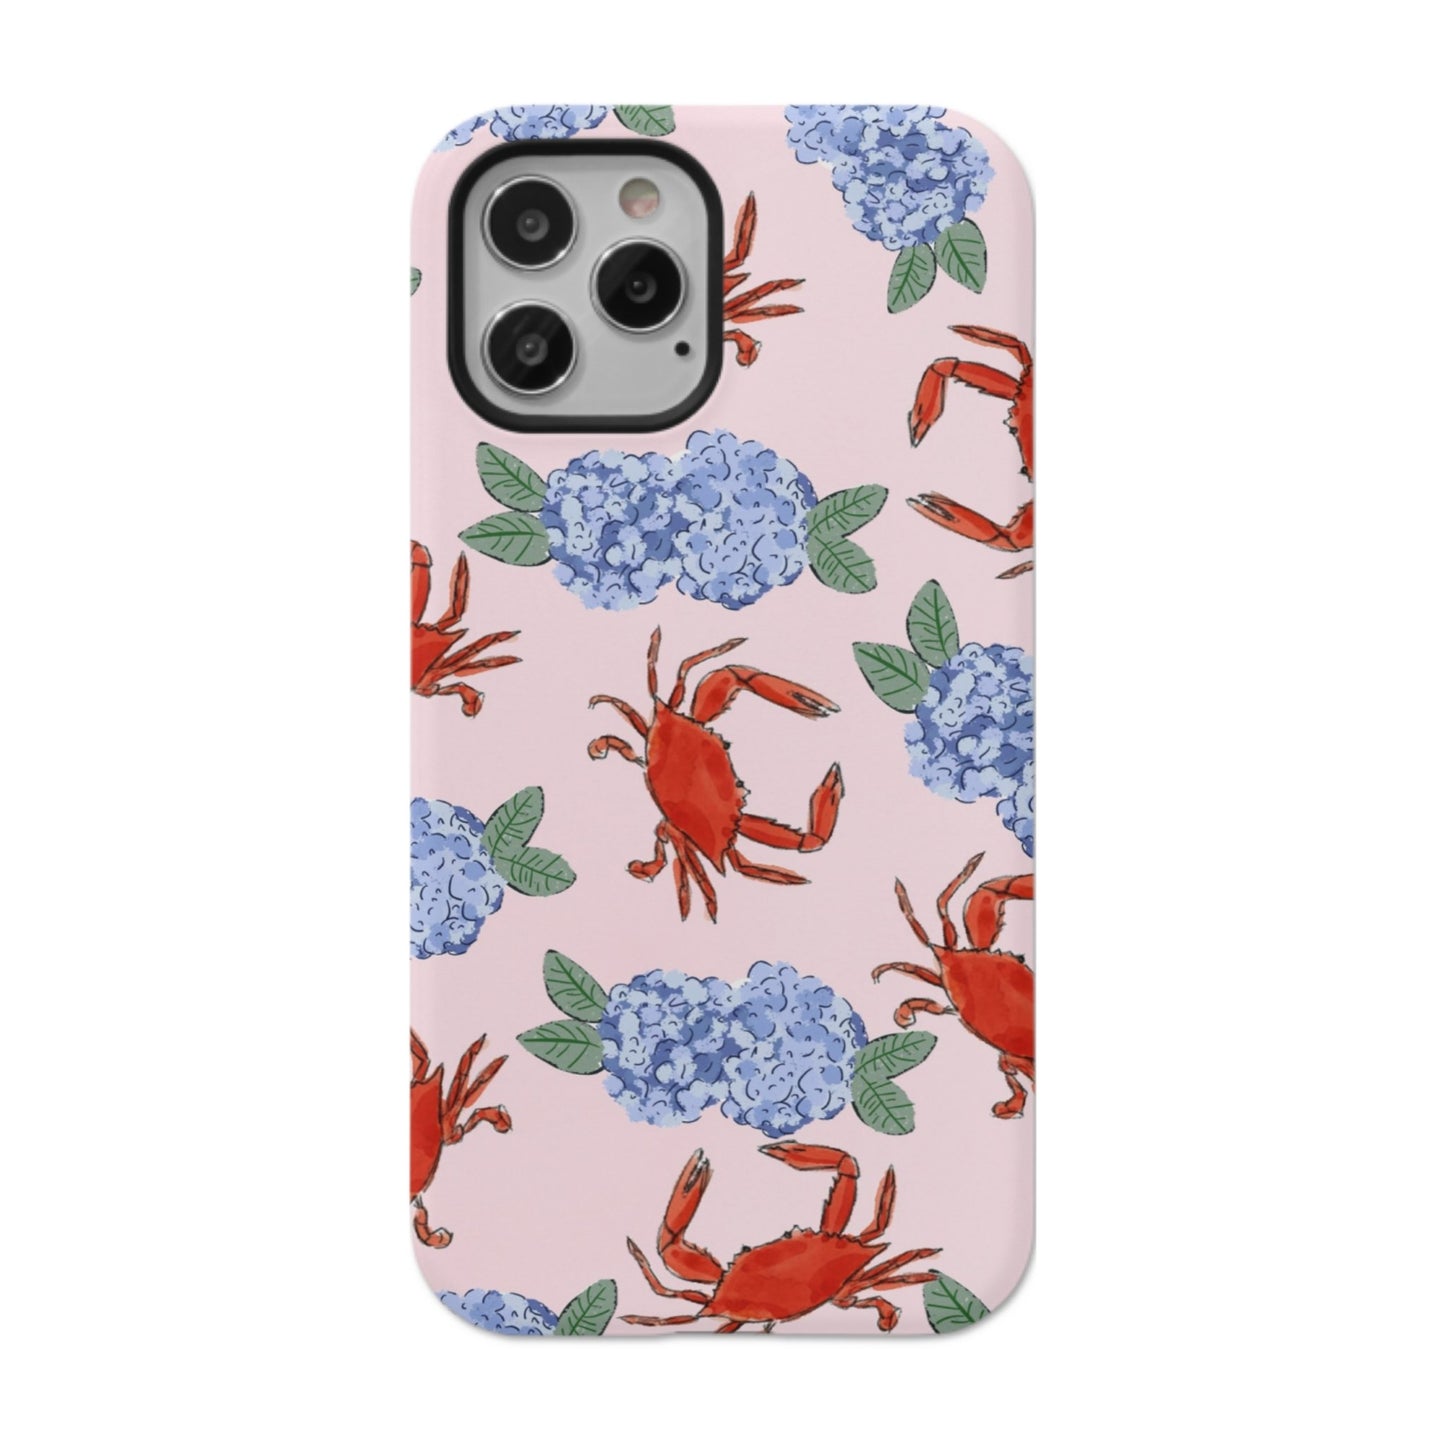 Crabby Blossom - Culley + Co.